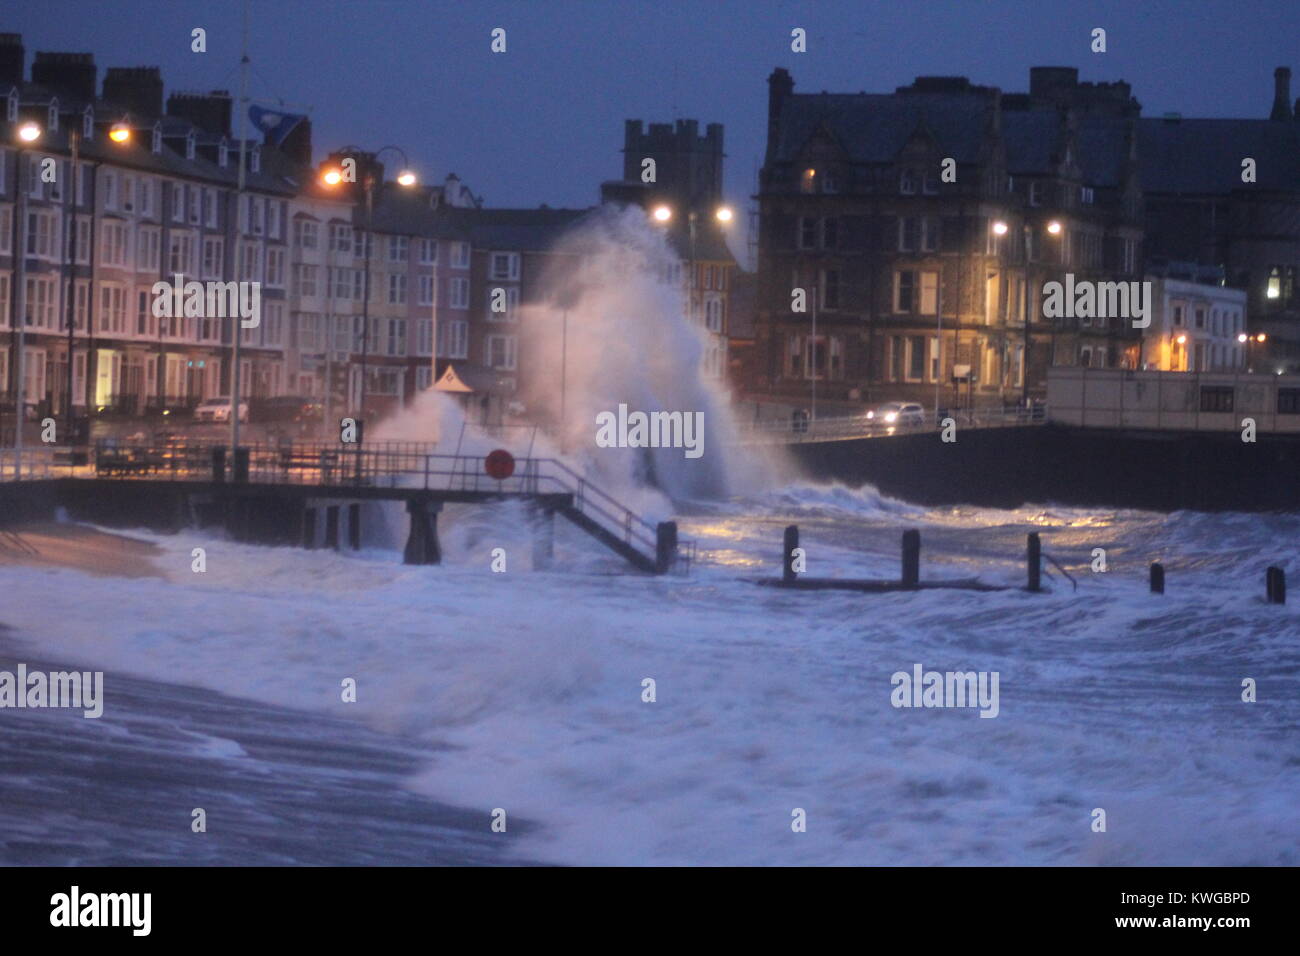 Aberystwyth Wales. 3rd Jan, 2018. UK Weather. Storm Eleanor hits the Welsh coast with gales & gusts up to 80 mph driving in huge waves & torrential rain which smash into the promenade & harbour wall, with more strong winds expected during the next day's Credit: mike davies/Alamy Live News Stock Photo